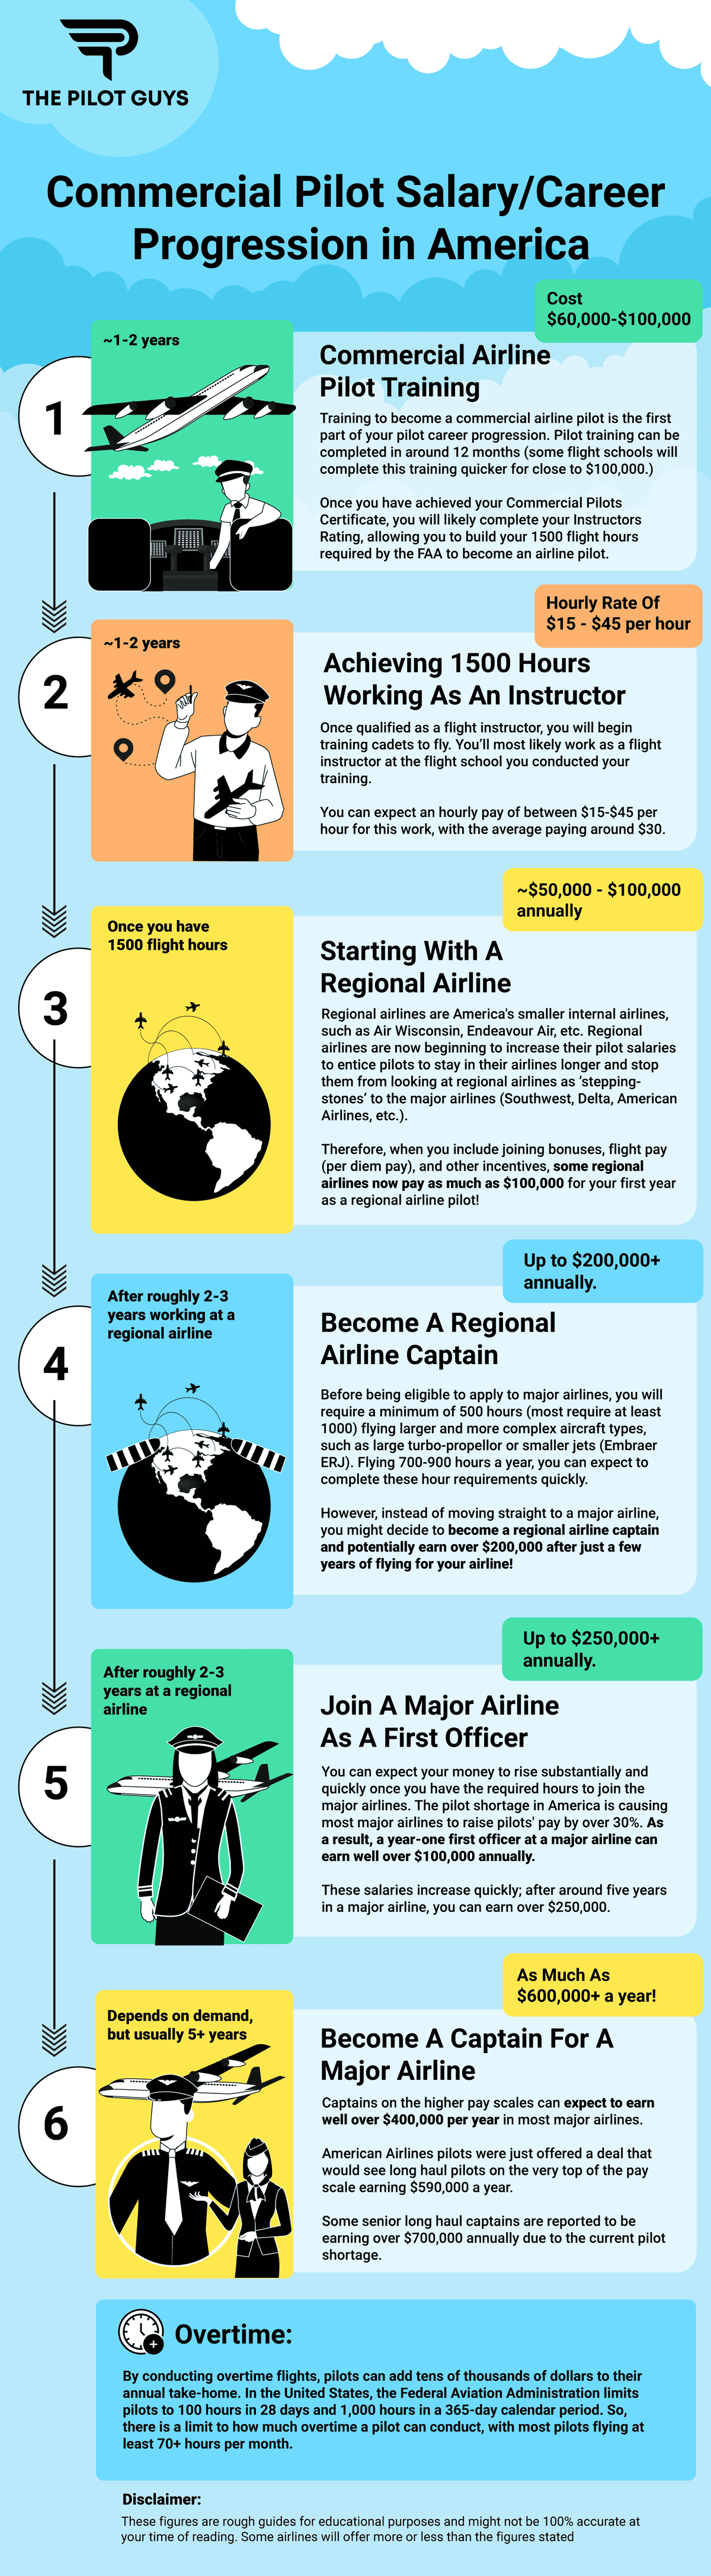 Pilot career progression infographic. Step 1 - Becomming a pilot (cost $60,000-$100,000). Step 2 - Working as a flight instructor (pay - $25-45 per hour). Step 3 - Working at a regional airline (pay - $50,000 - $100,000). Step 4 - Become a regional airline captain (pay - $200,000). Or, join a major airline (pay - $100,000+) Step 5 - Become a major airline captain (pay - $400,000+).